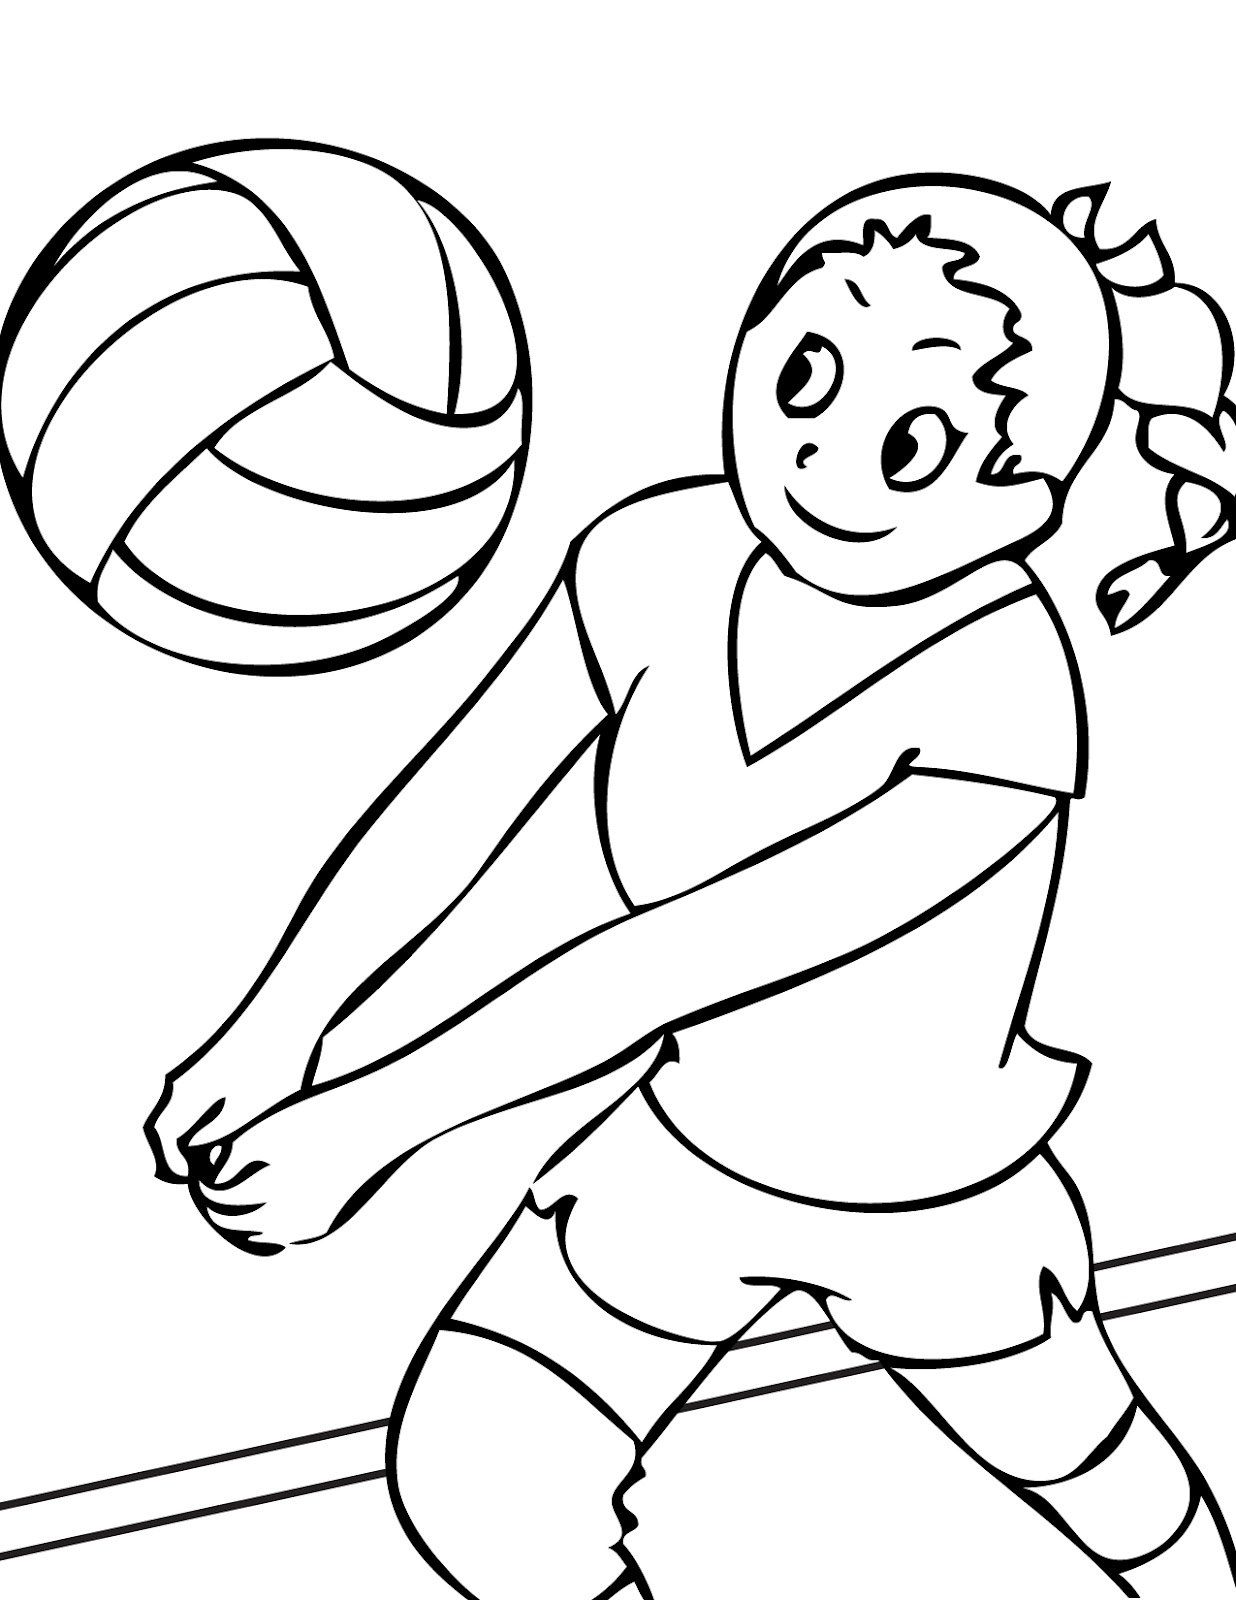 coloring ~ Coloring Volleyball Pages Librarians Plan Ahead ...